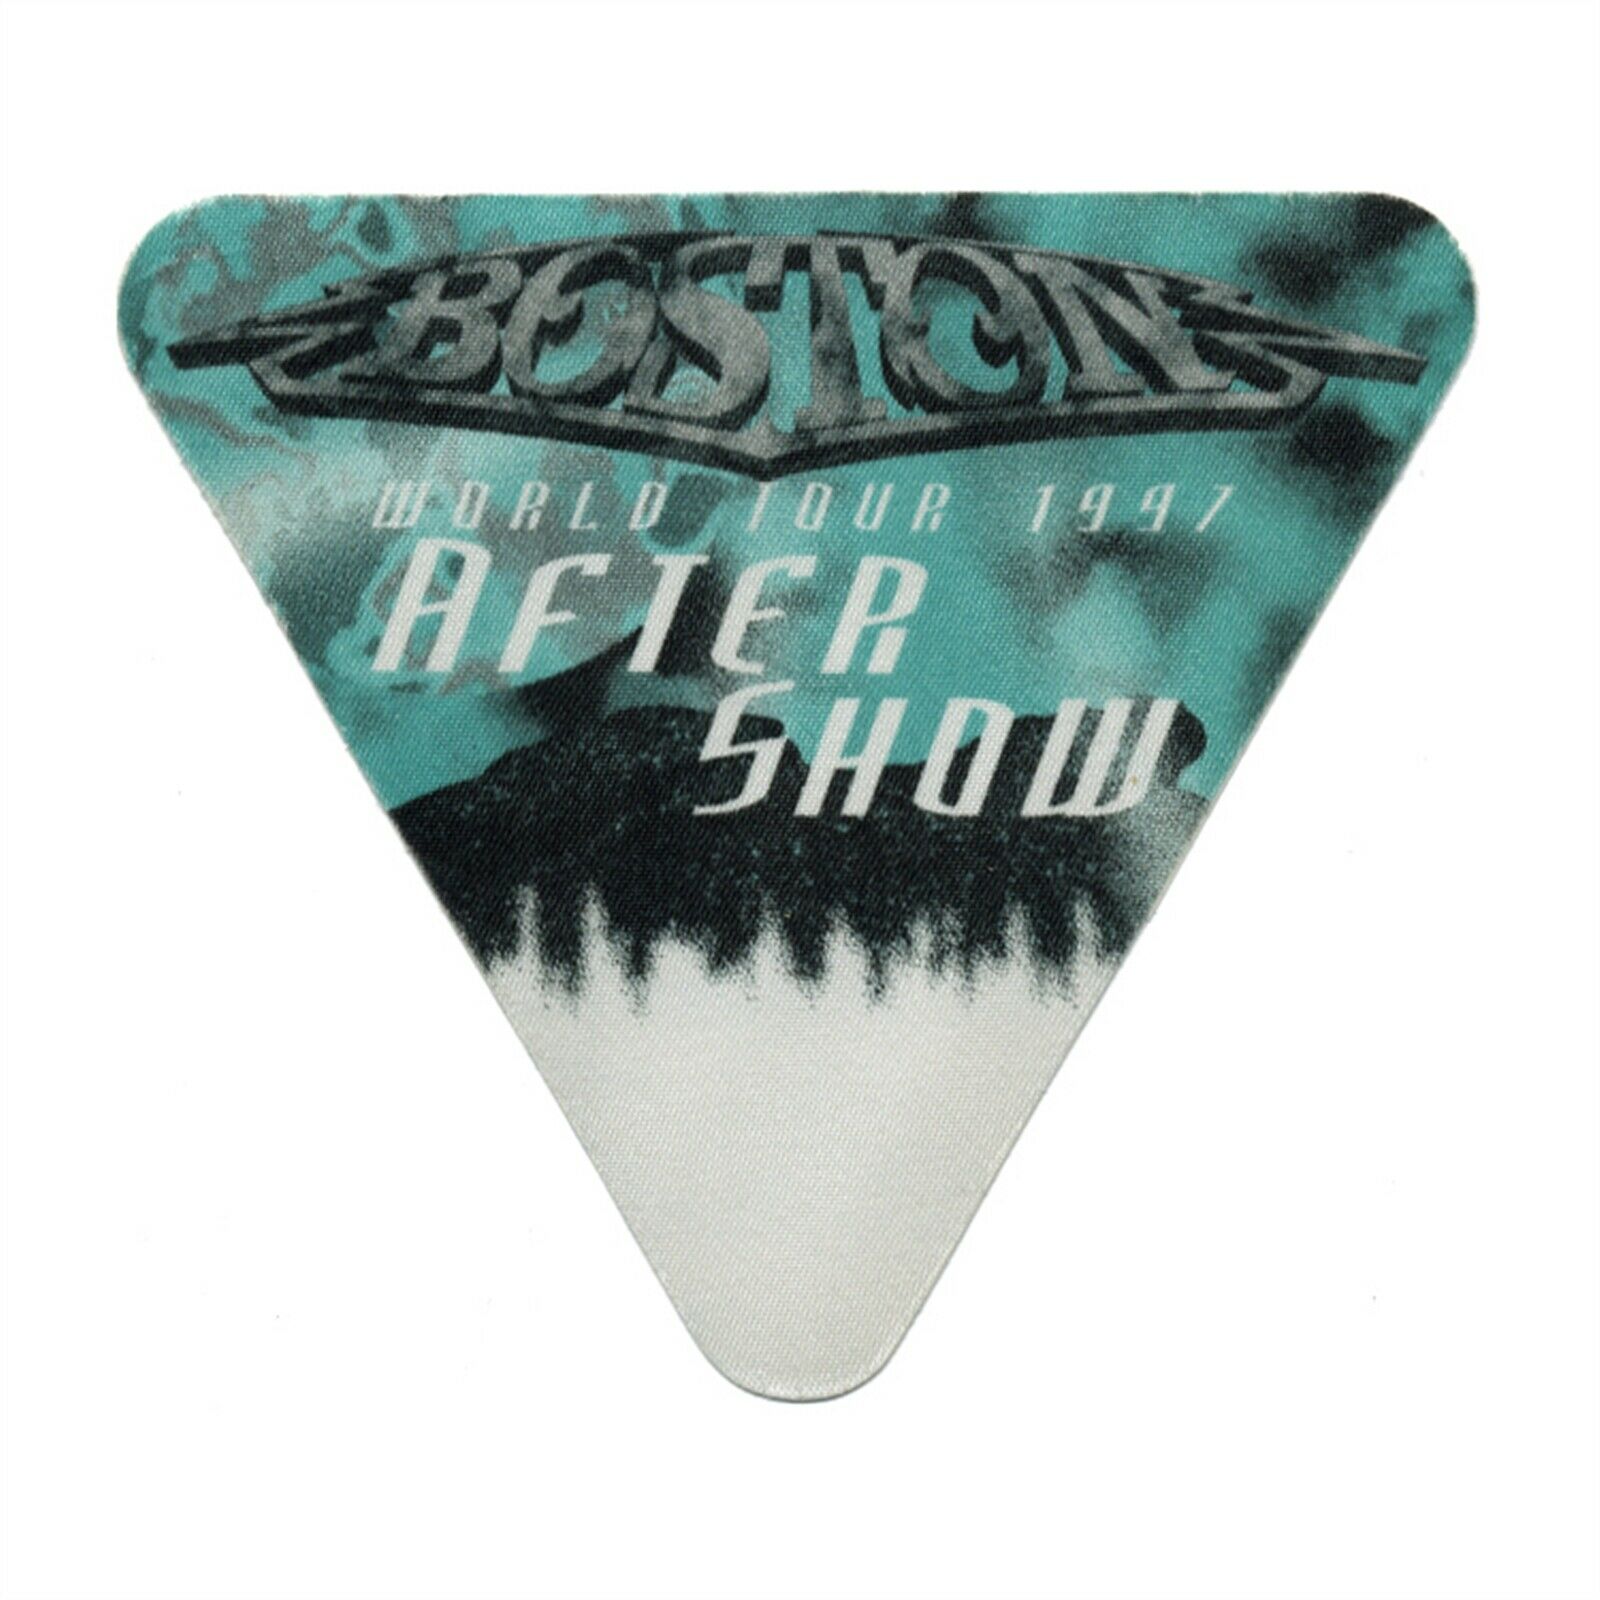 Boston 1997 Greatest Hits Concert Tour Aftershow Backstage Pass